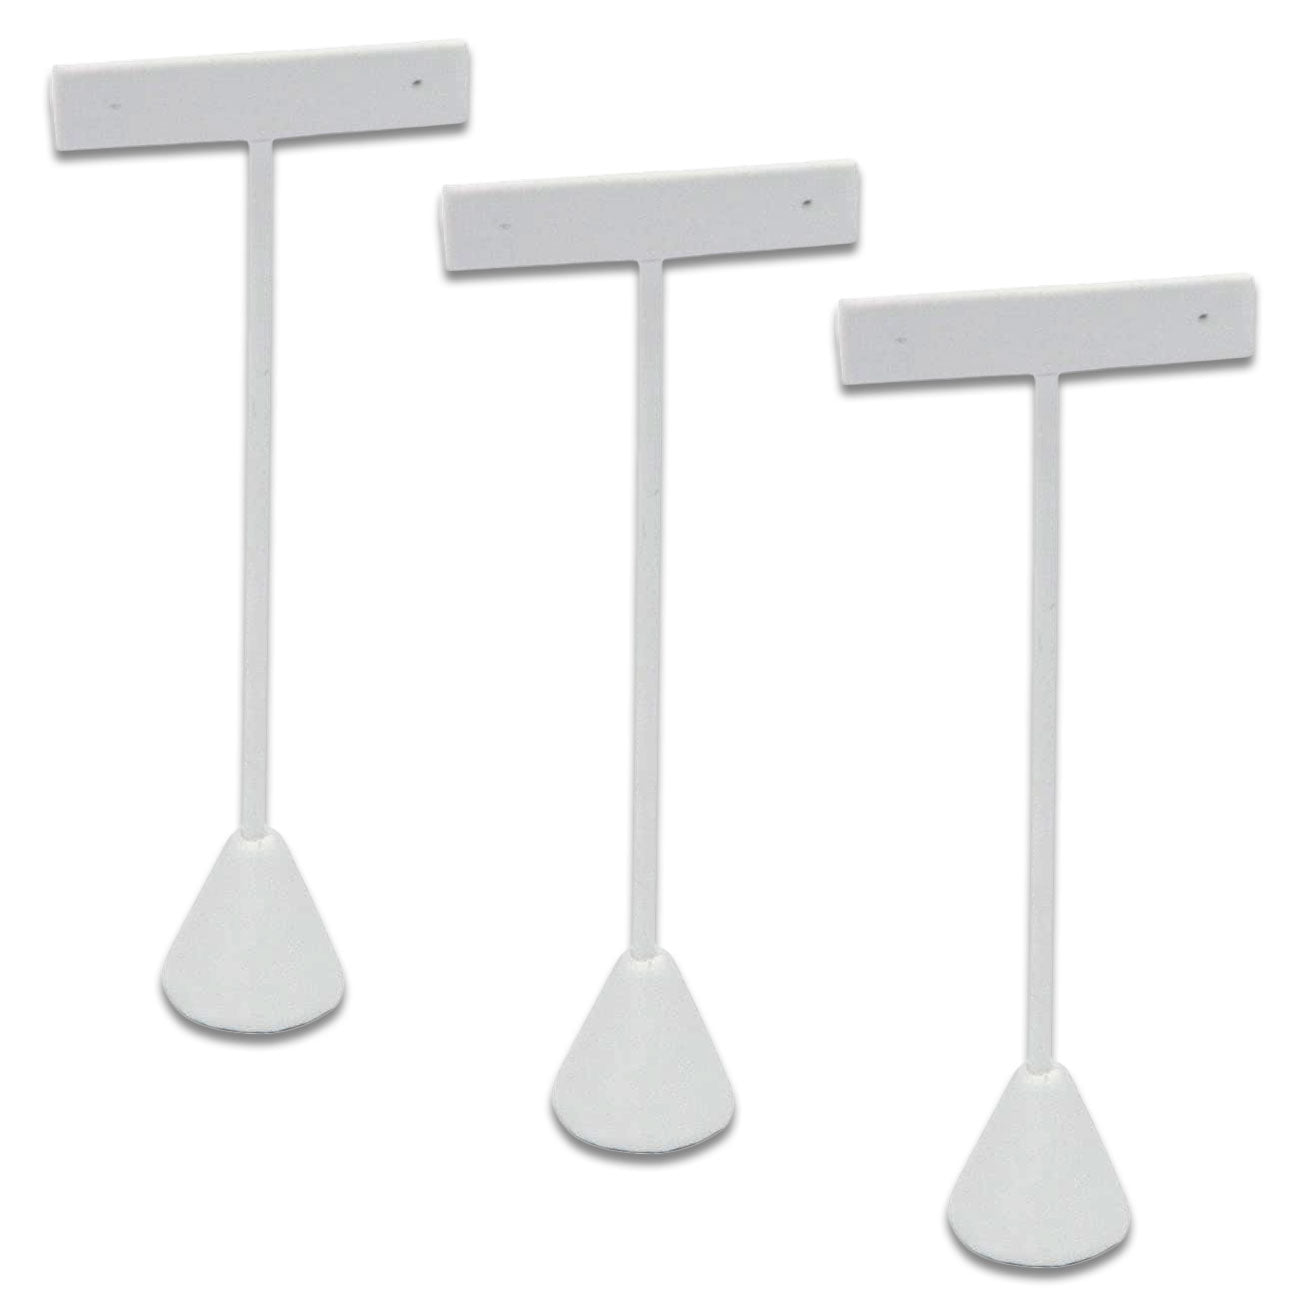 3 Pack of 6 3/4" White Leatherette T-Shape Earring Display Stands